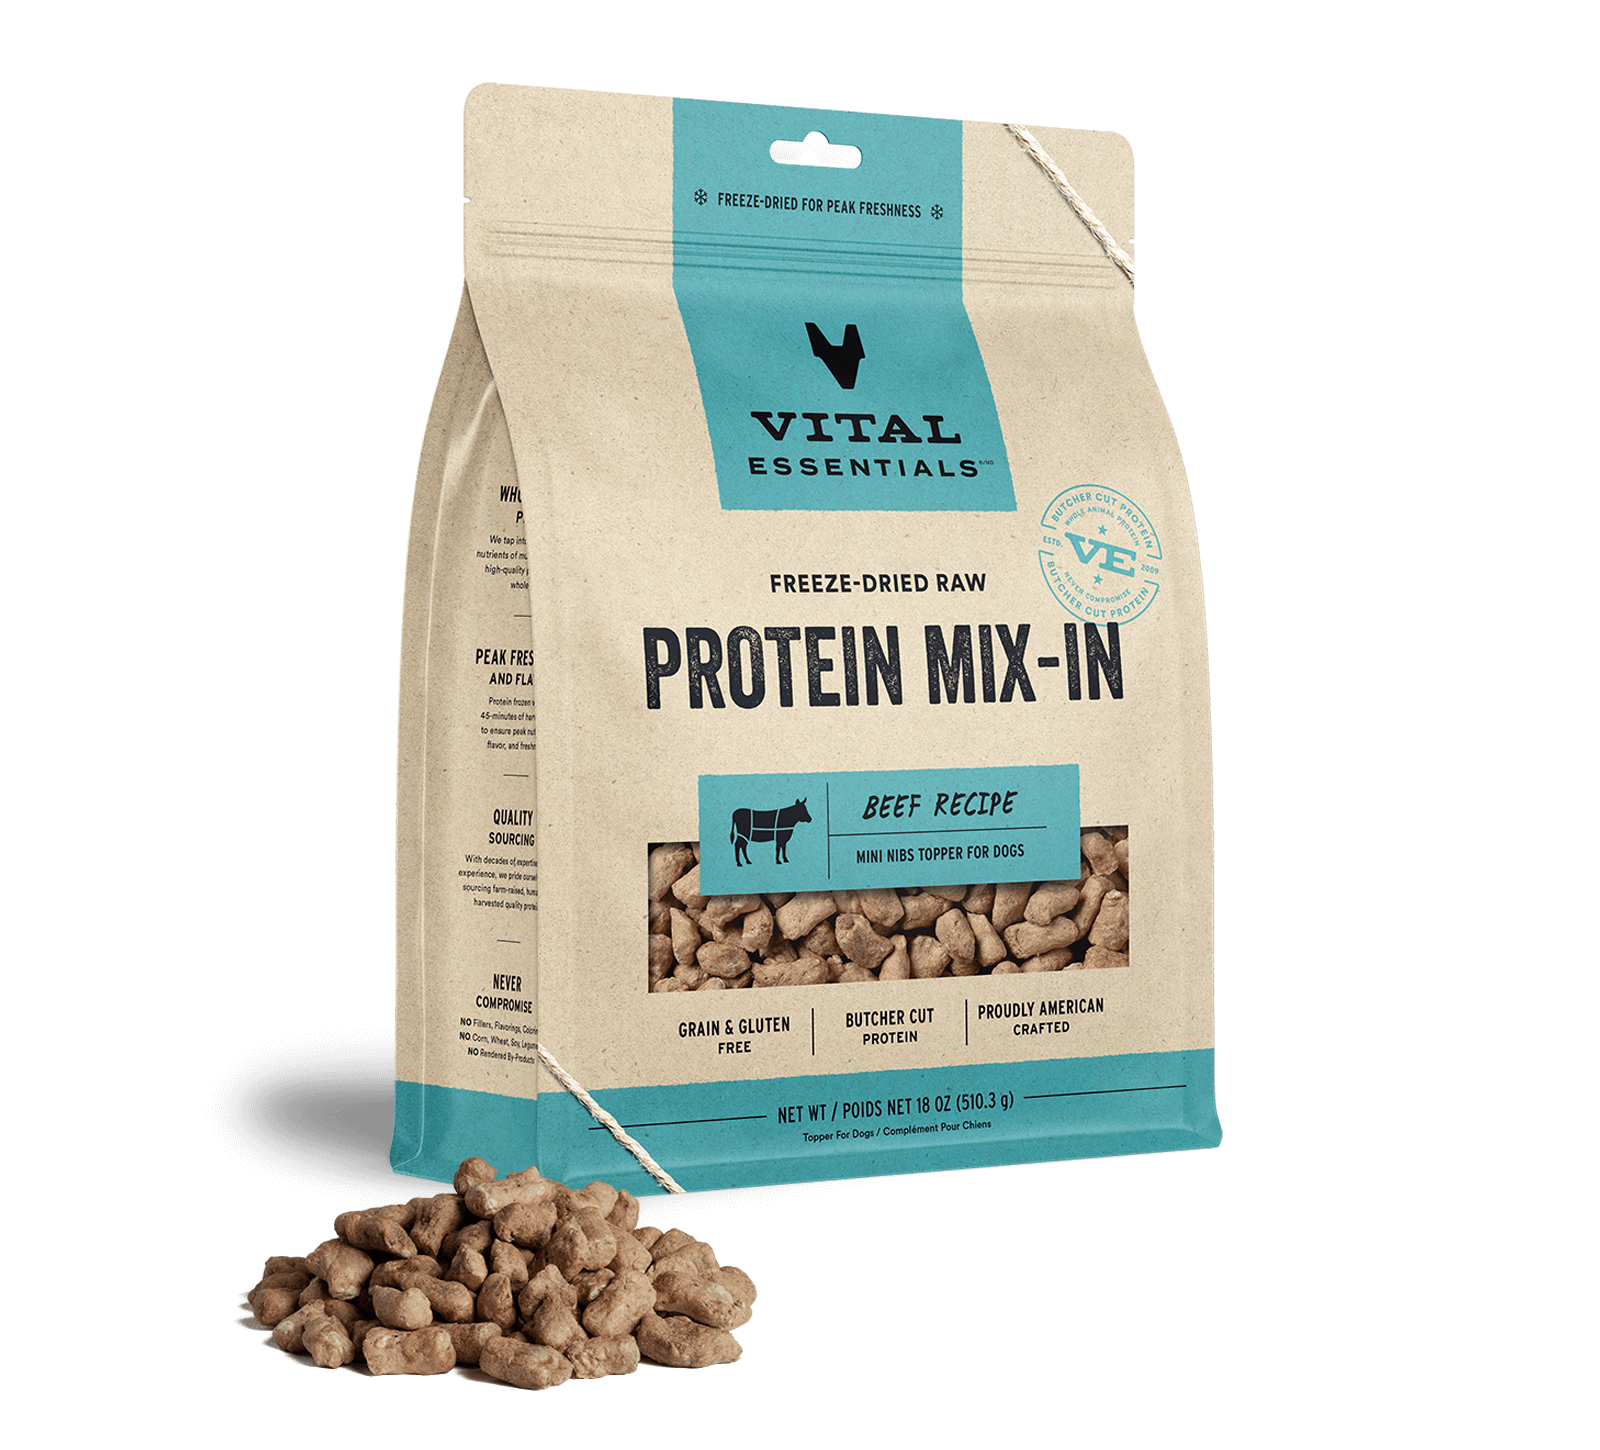 Vital Essentials Freeze-Dried Raw Protein Mix-In Beef Recipe Mini Nibs Topper for Dogs, 18 oz - Items on Sale Now